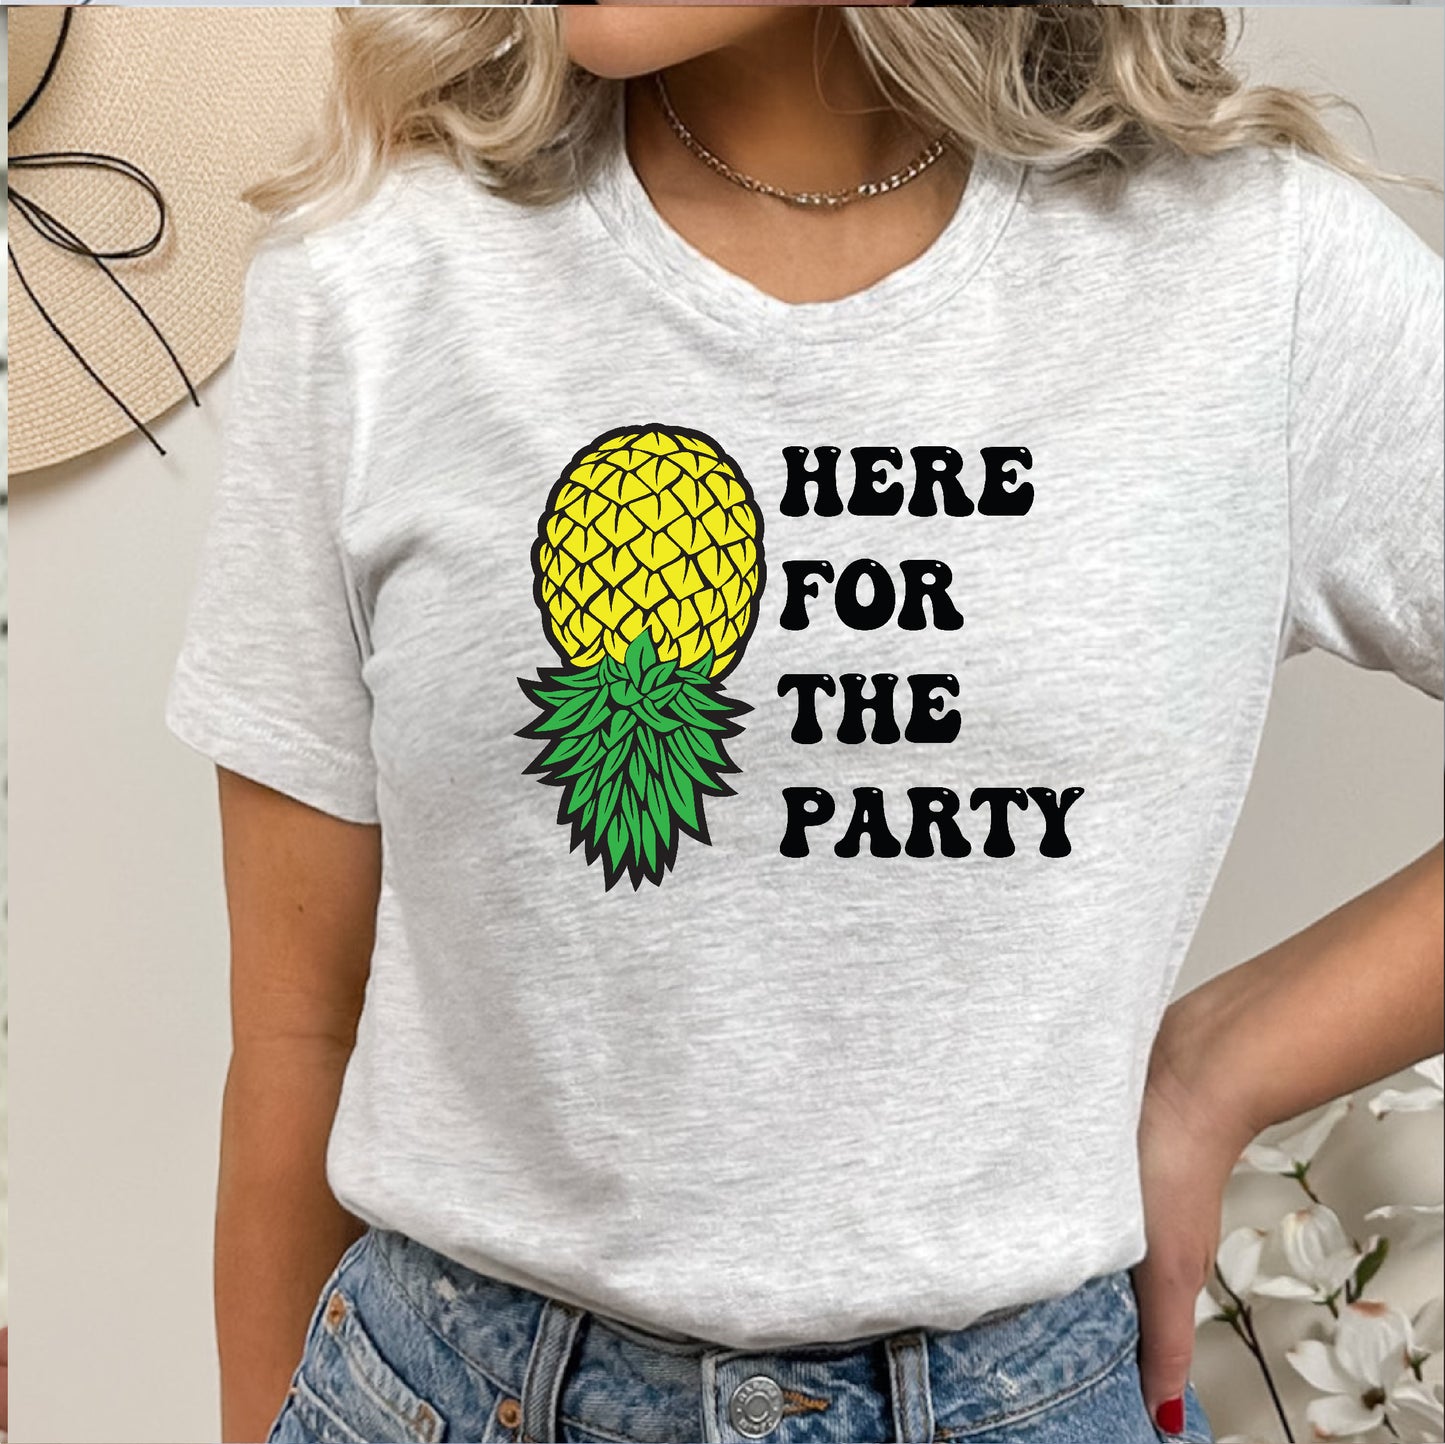 Here For the Party T-Shirt